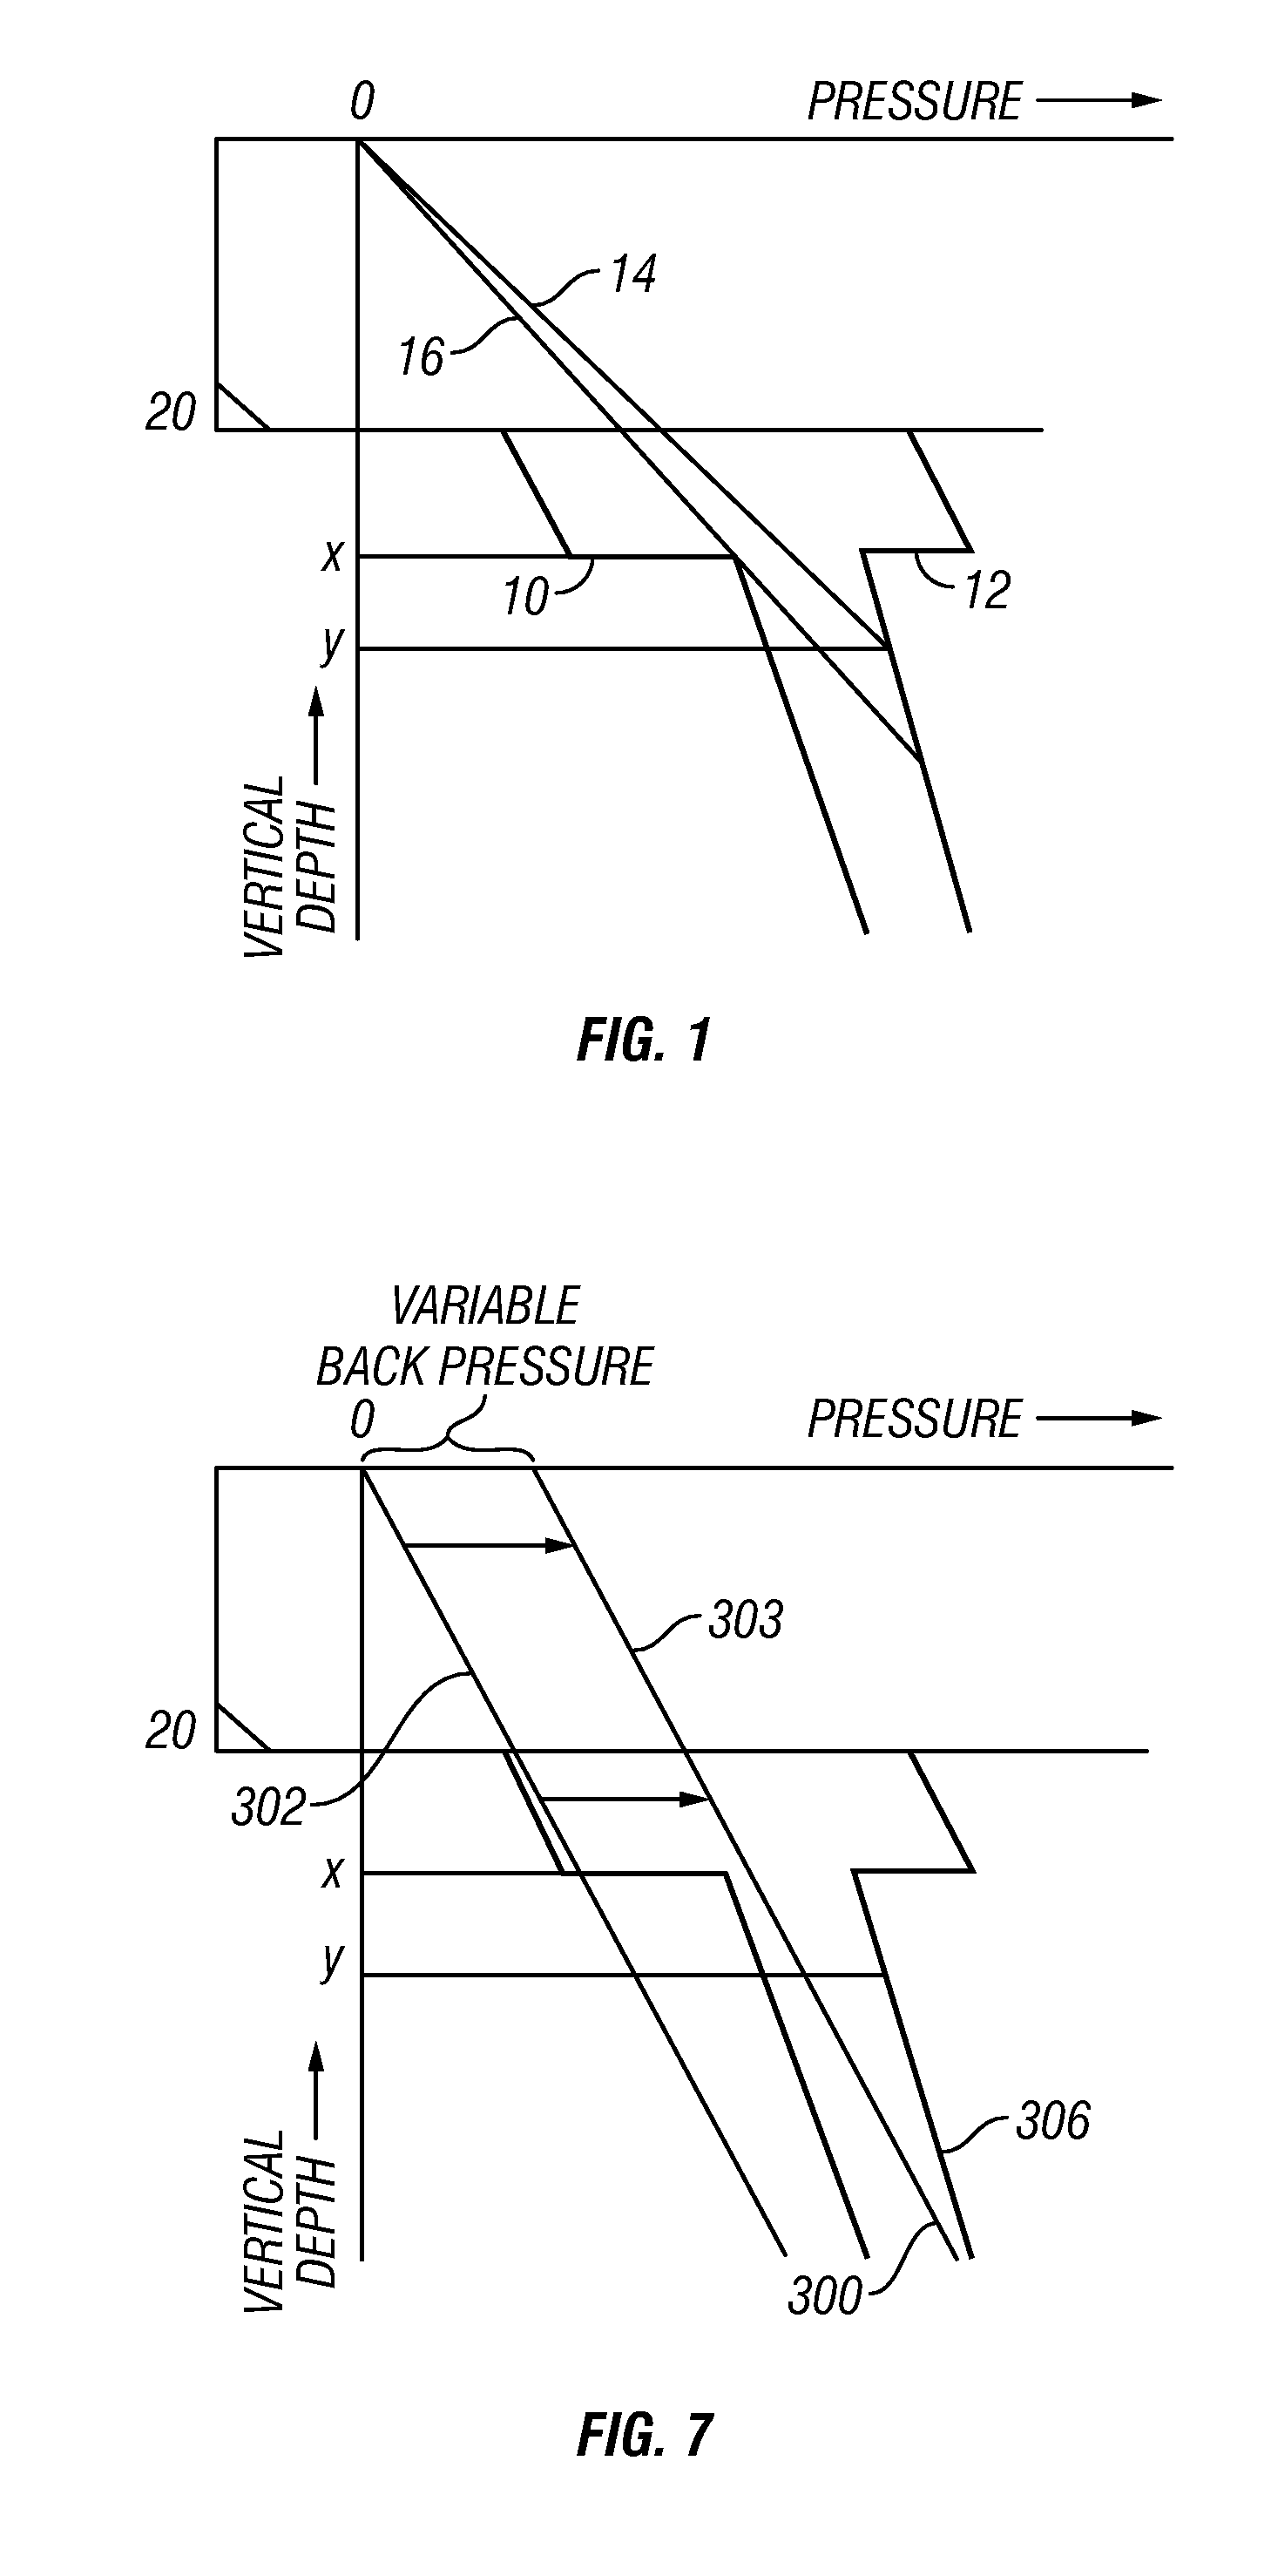 Pressure Safety System for Use With a Dynamic Annular Pressure Control System